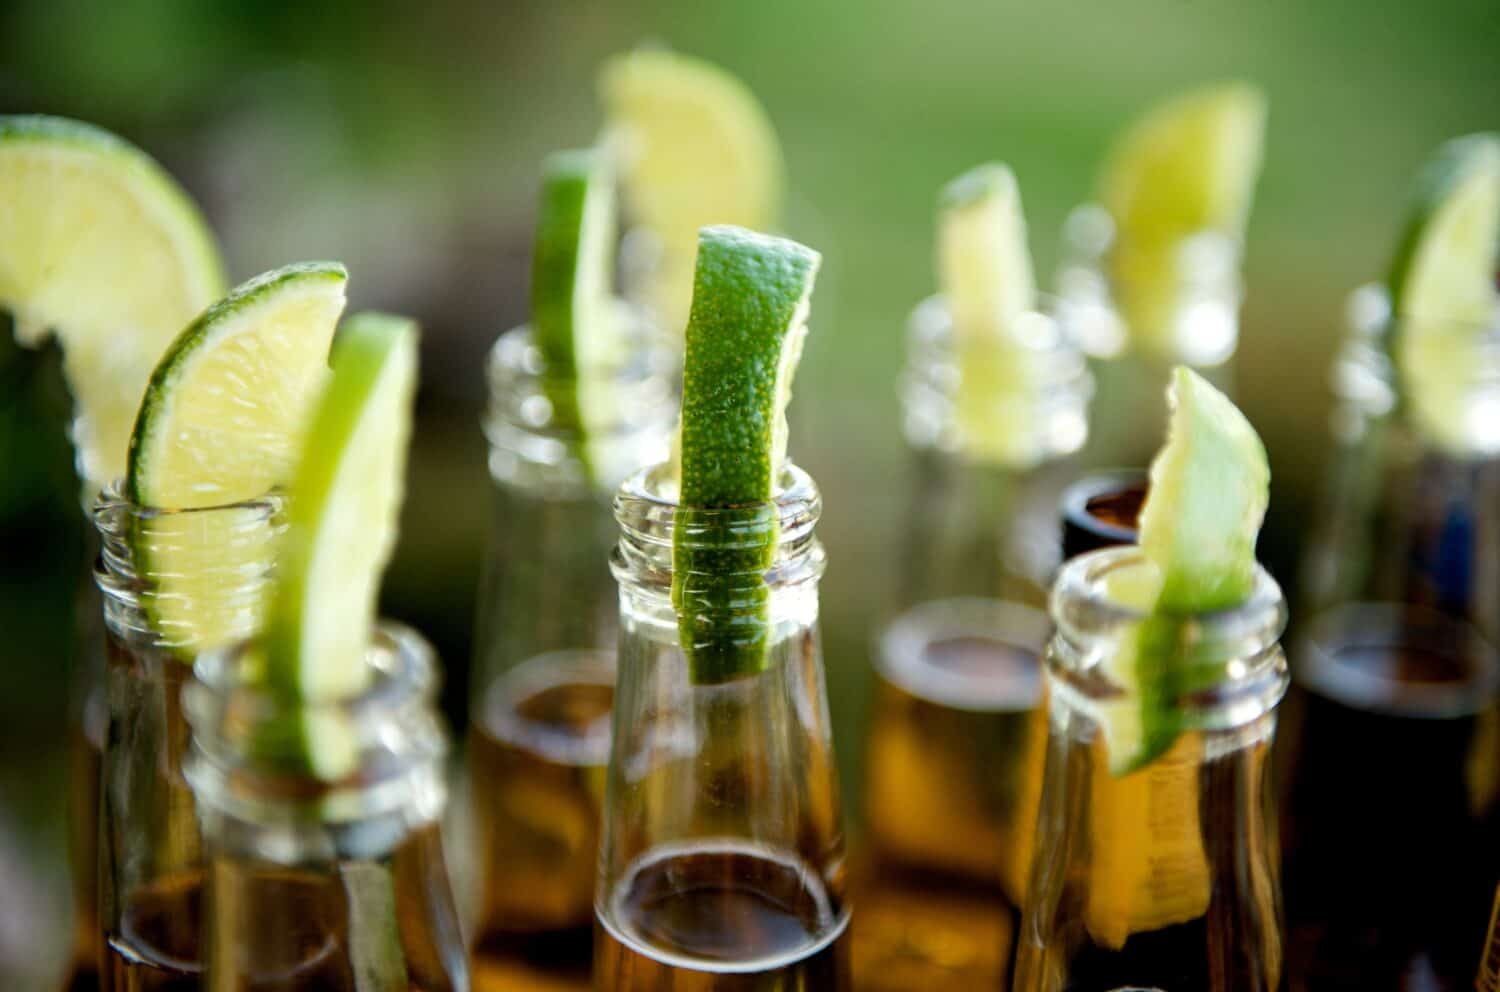 Close up image of multiple beer bottles with limes inserted